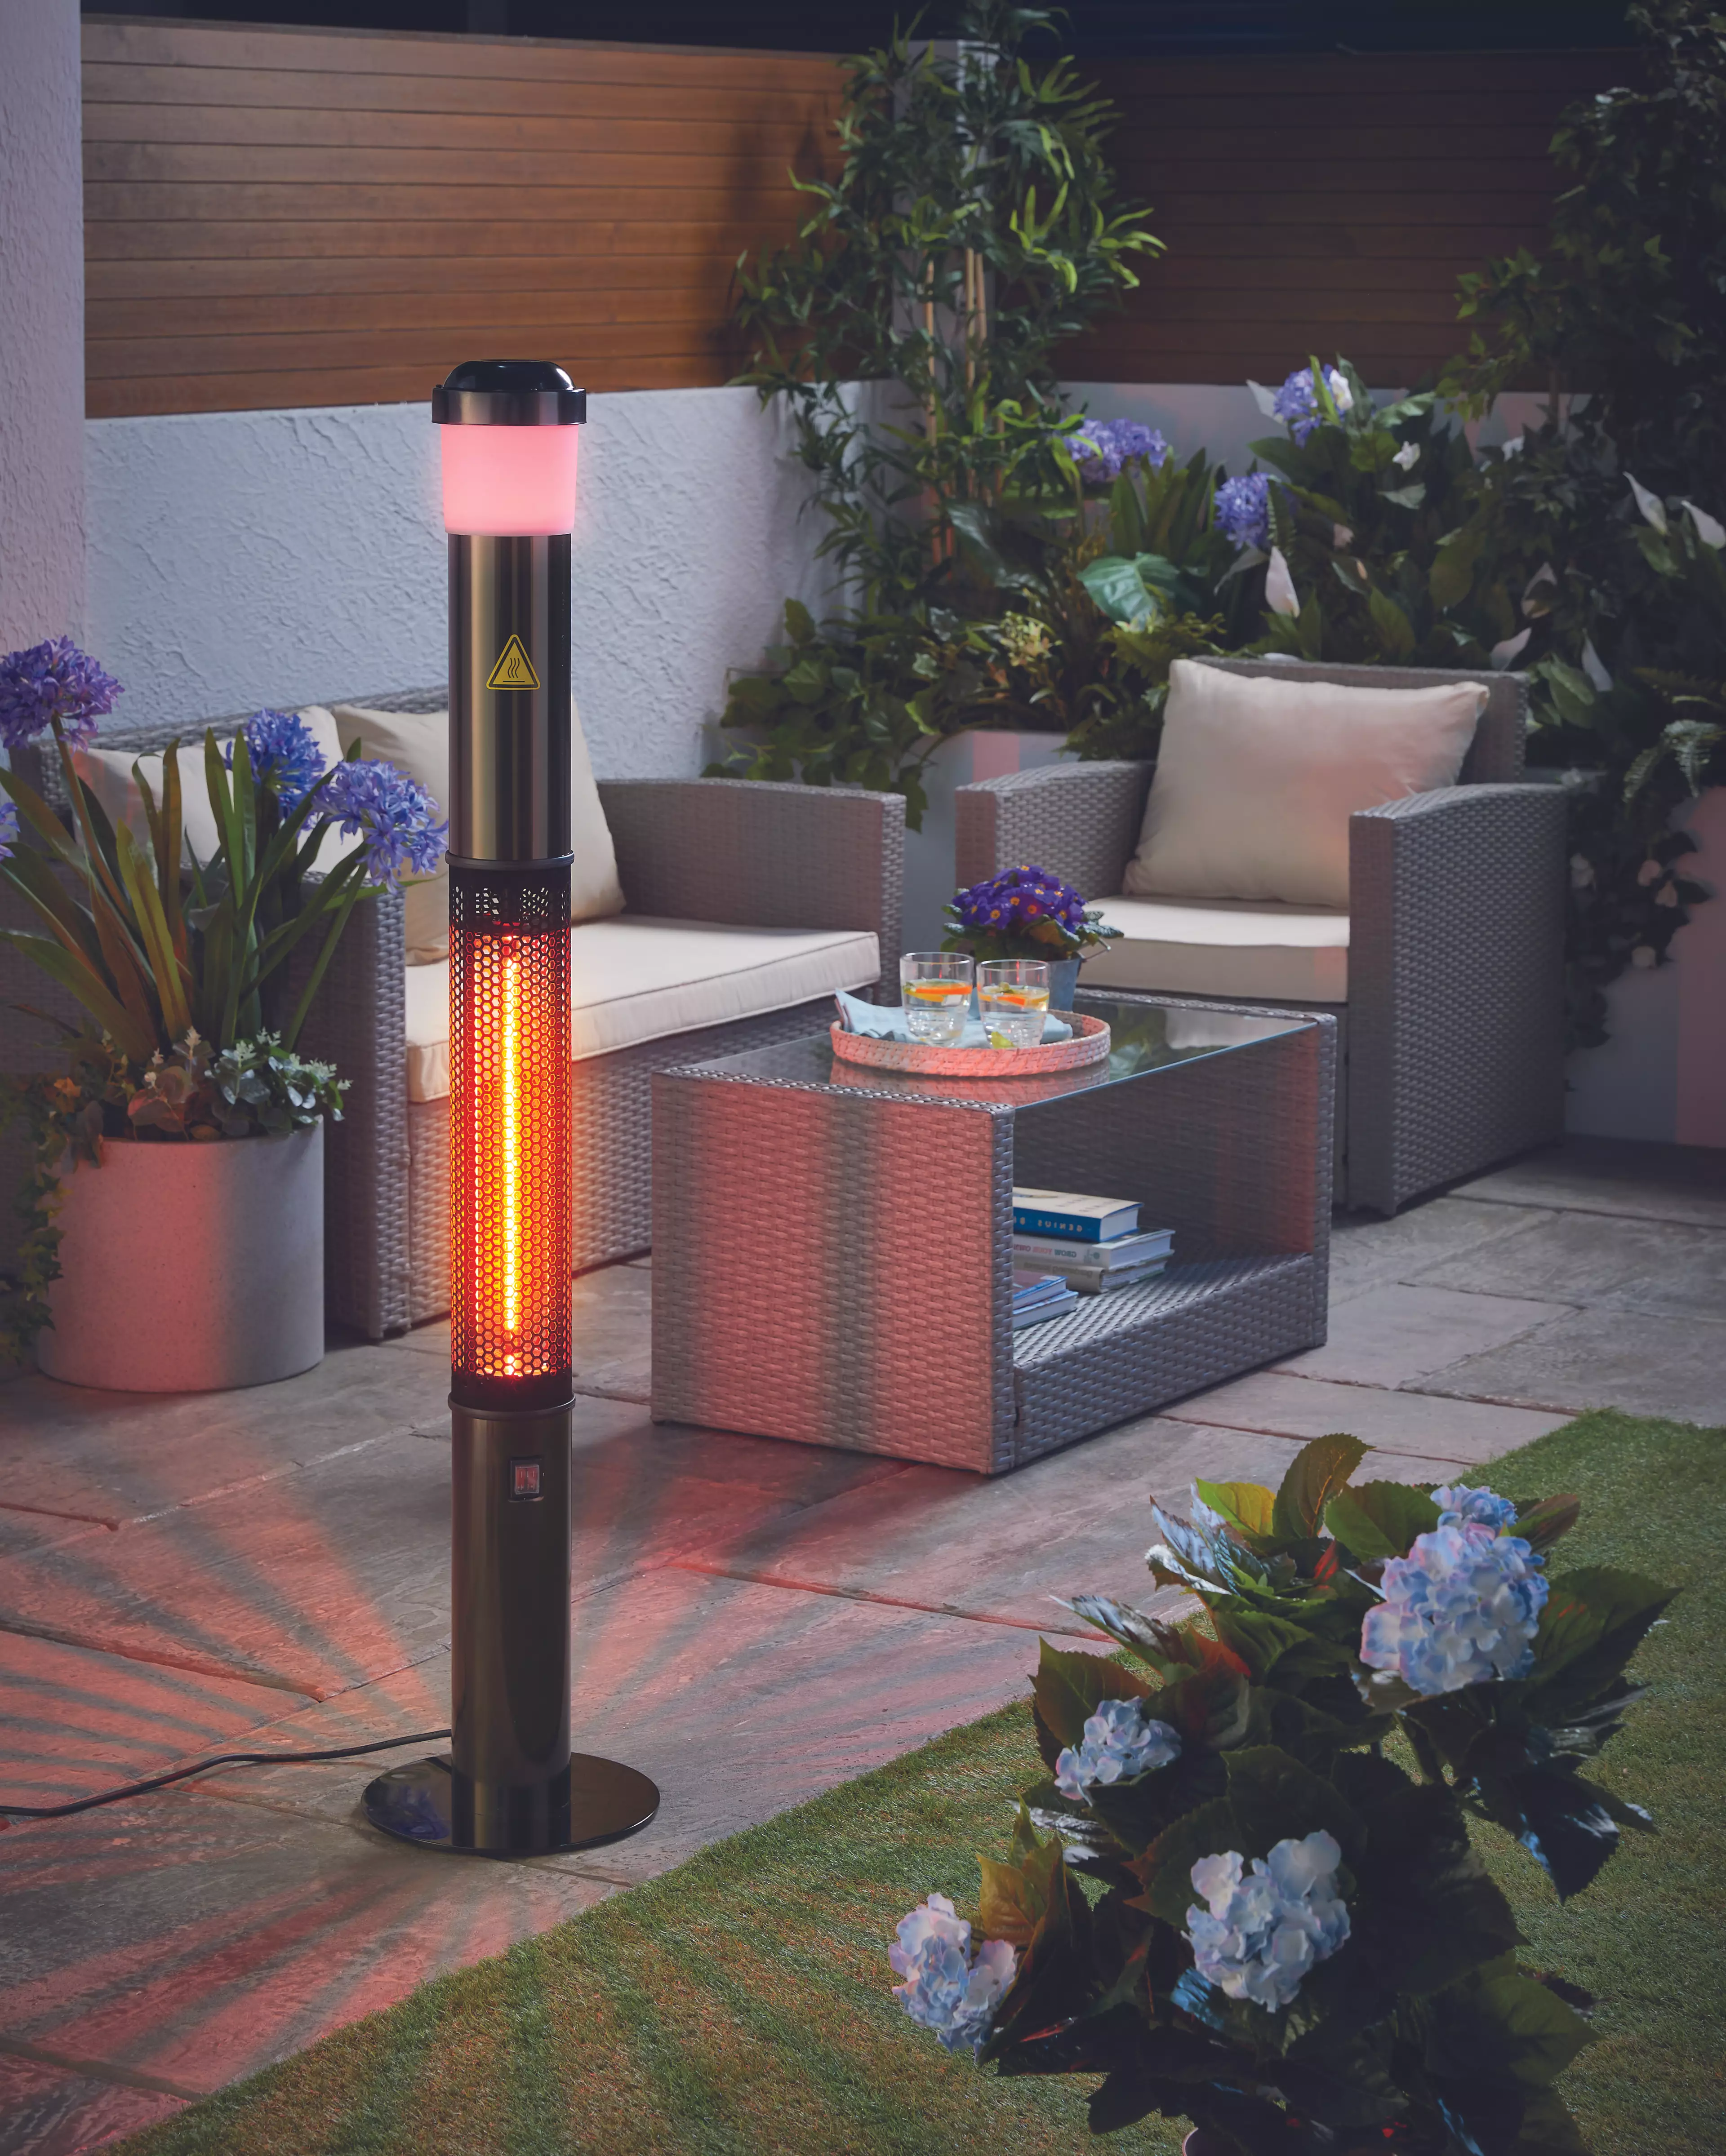 This patio heater is only £99.99 from Aldi.